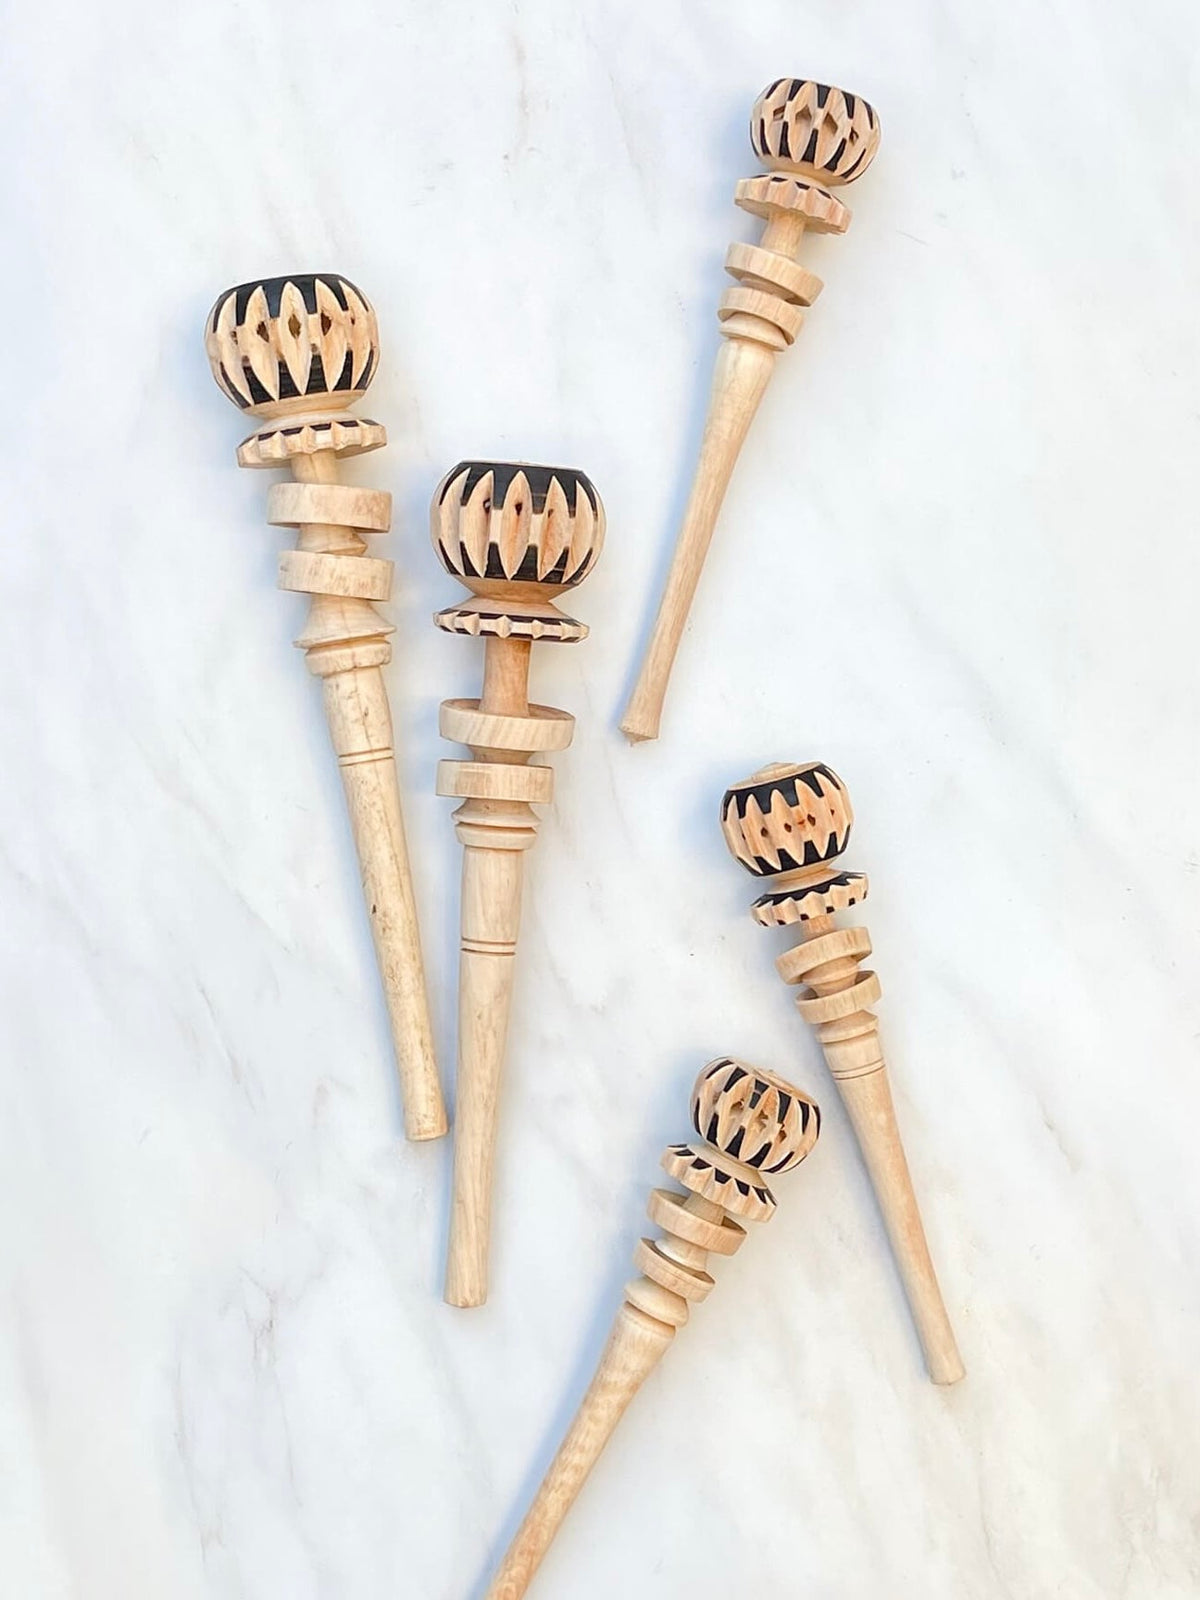 CHAMPS Artisanal Mexican Molinillo 12.5-Inch | Mexican Hot Chocolate Mixer  | Molinillo de Chocolate de Madera | Wood Stirrer Whisk | Handmade Premium